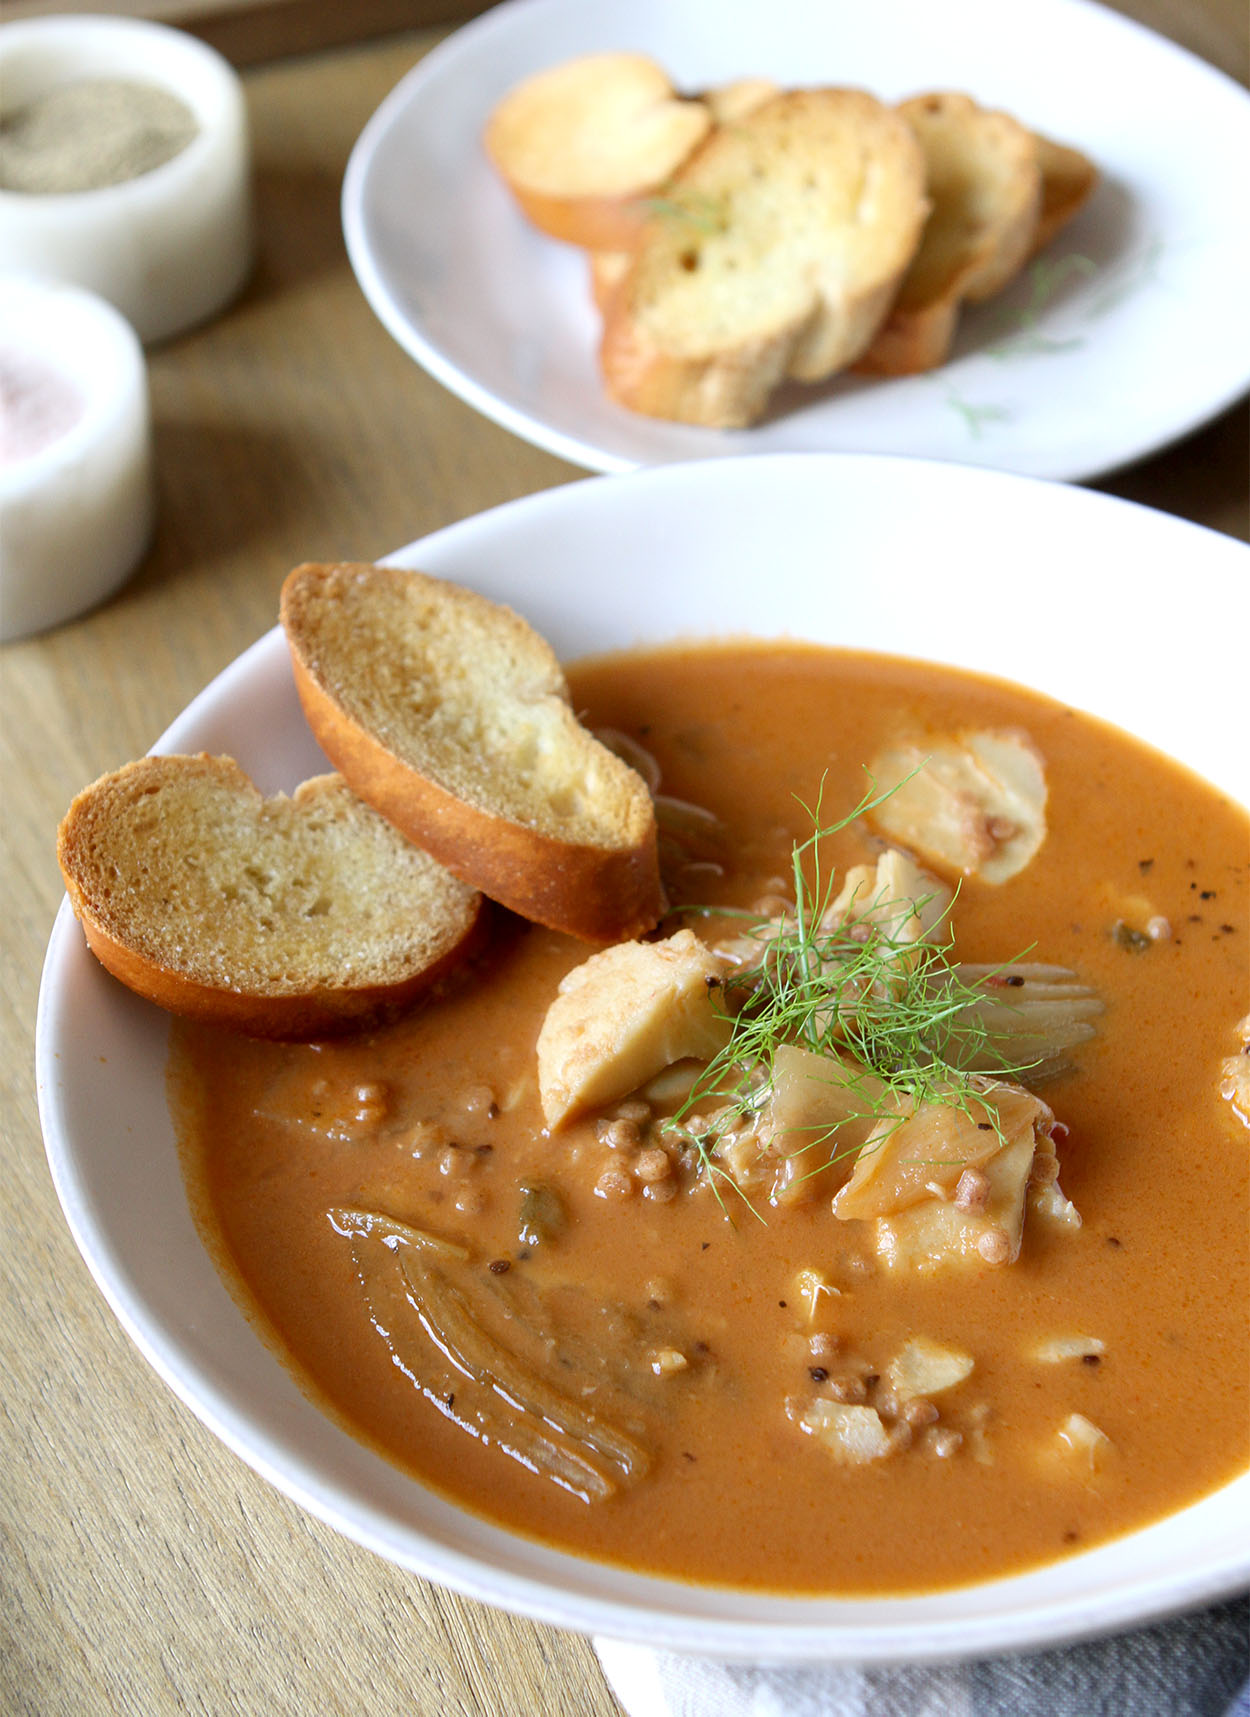 A white bowl full of fish stew, garnished with fennel frans and two crostinis